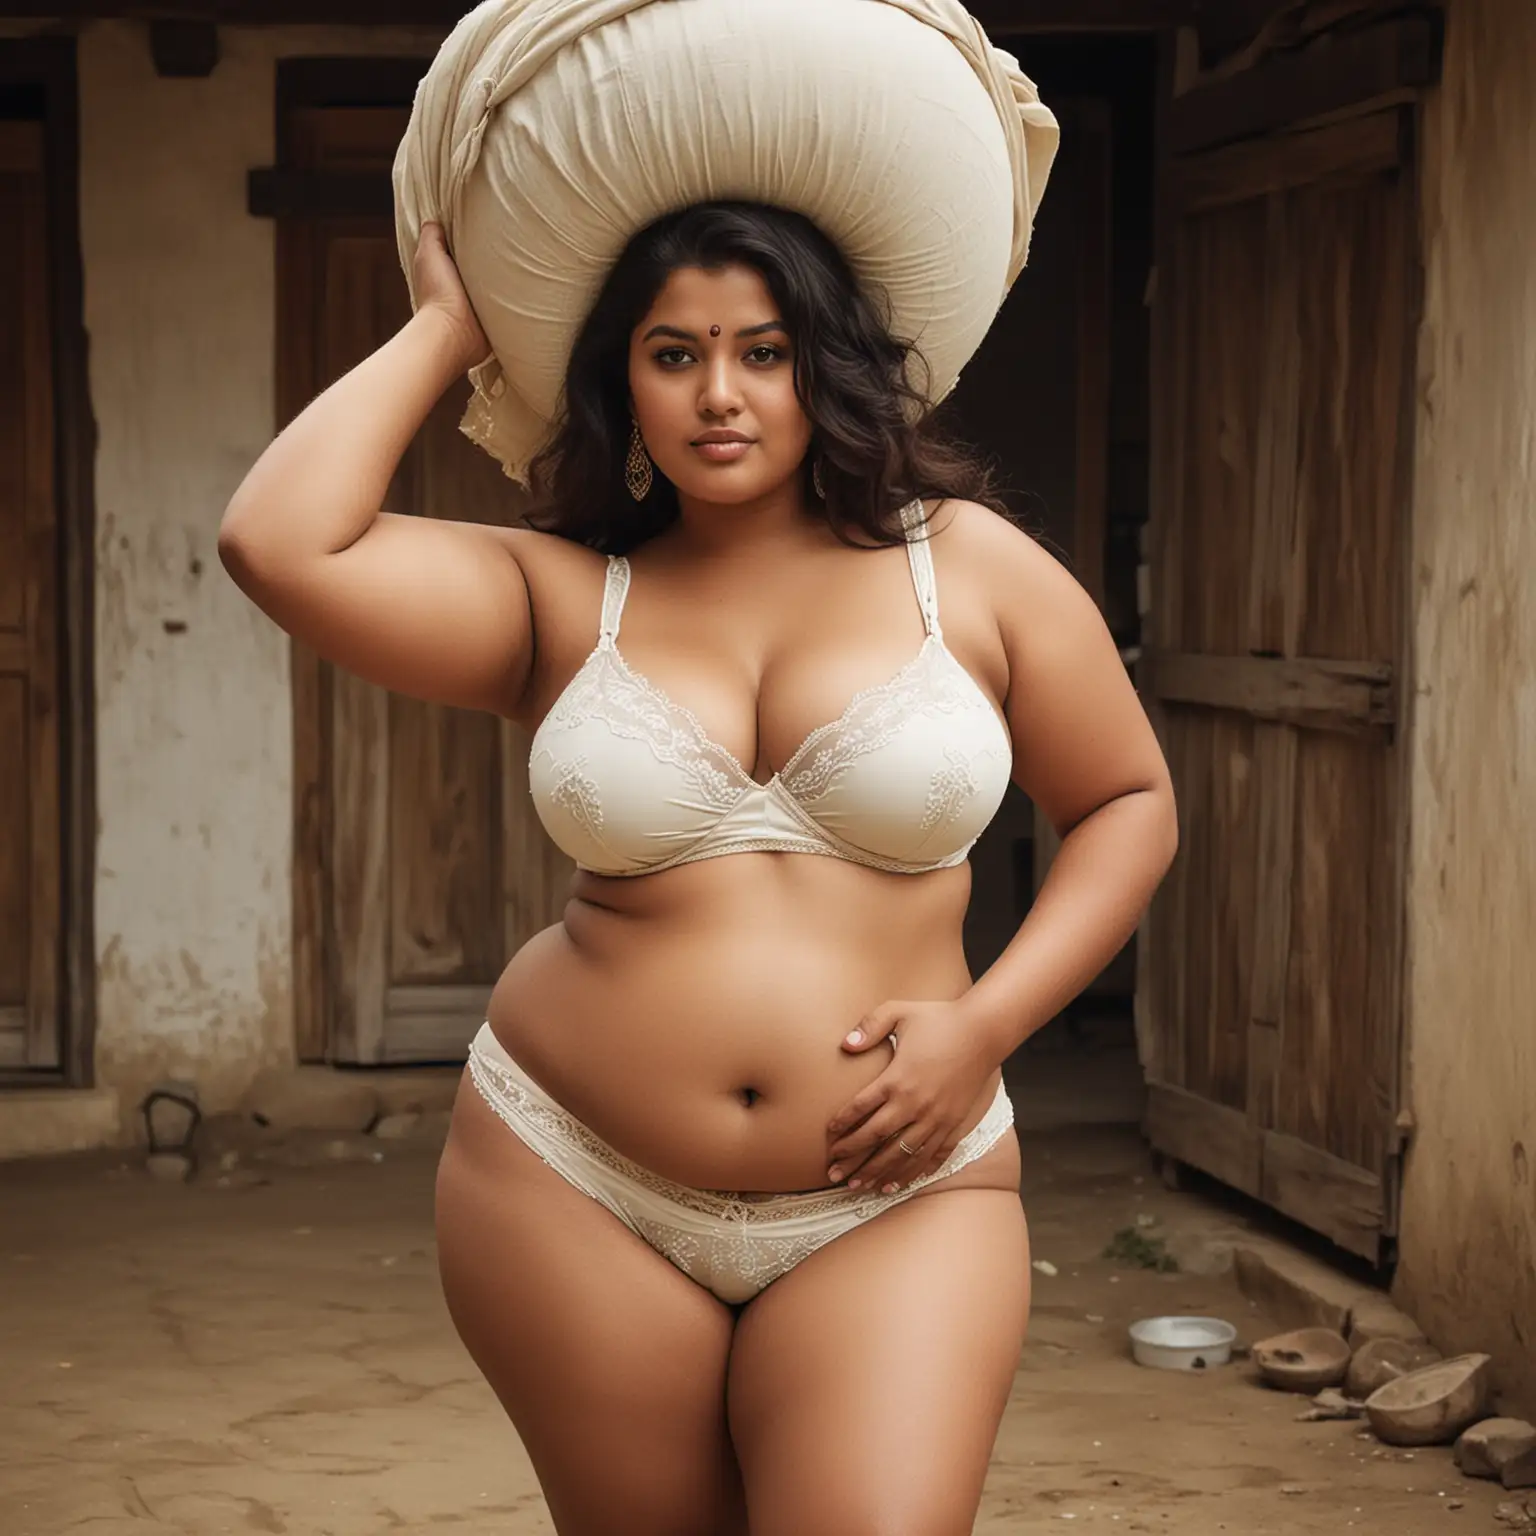 Here's the refined and erotic version of your prompt:

"Envision a seductive BBW woman with curves that command attention, clad in nothing but an old Bangladeshi undergarment that clings to her ample form. Her chubby waist sways enticingly as she carries a pitcher balanced effortlessly on her head, the weight of her responsibilities adding to the allure of her presence. In the rustic surroundings of a village, she exudes a raw sensuality that captivates all who behold her, a symbol of strength and beauty intertwined."